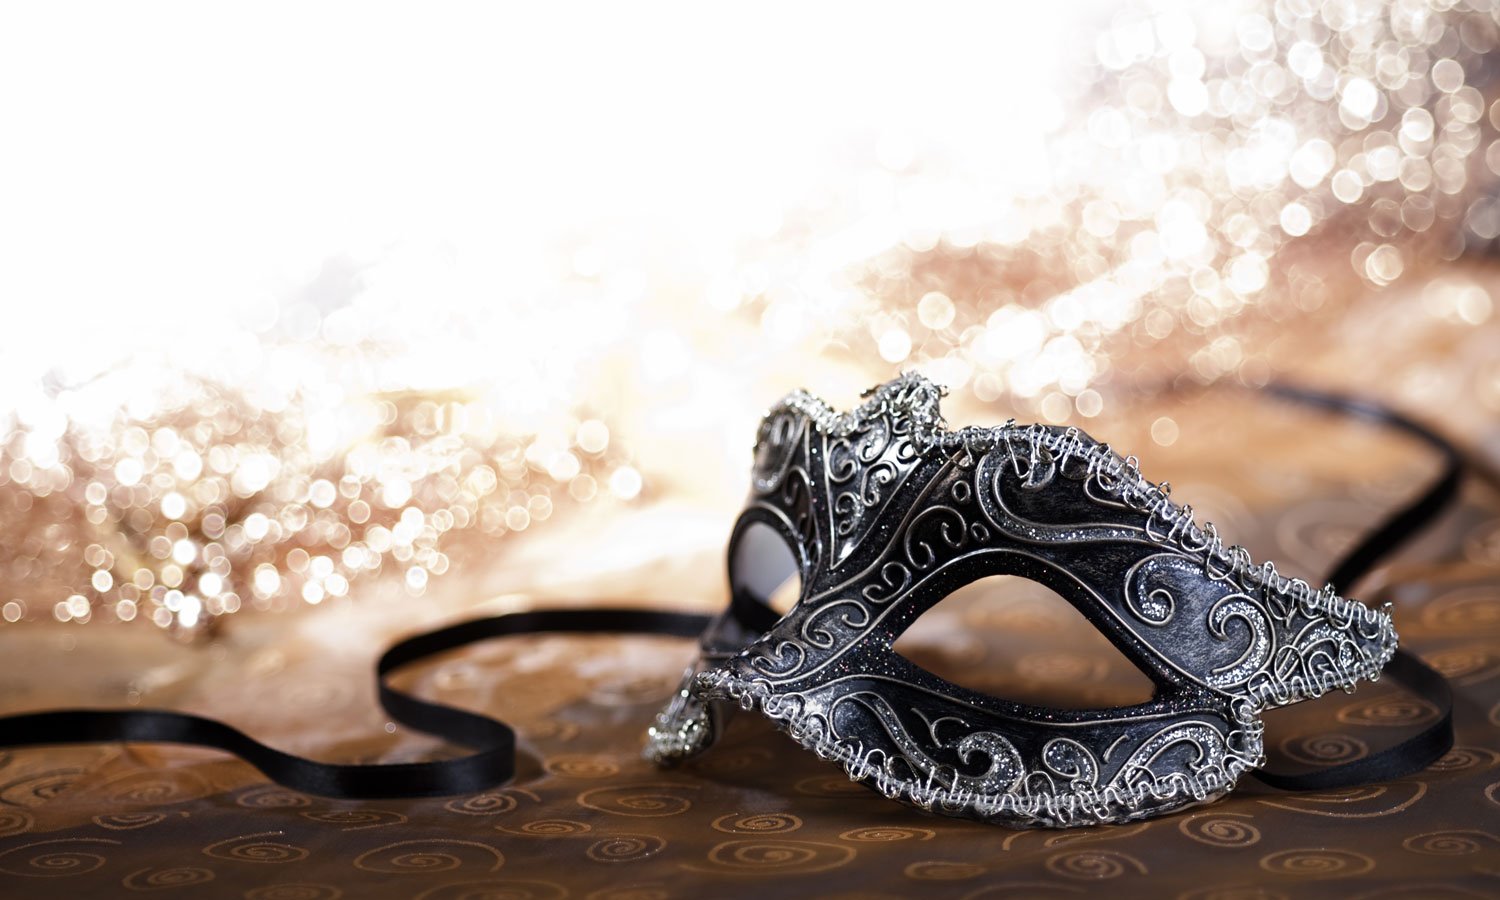 Announcing Lady Anne Funerals Masquerade Trivia Night